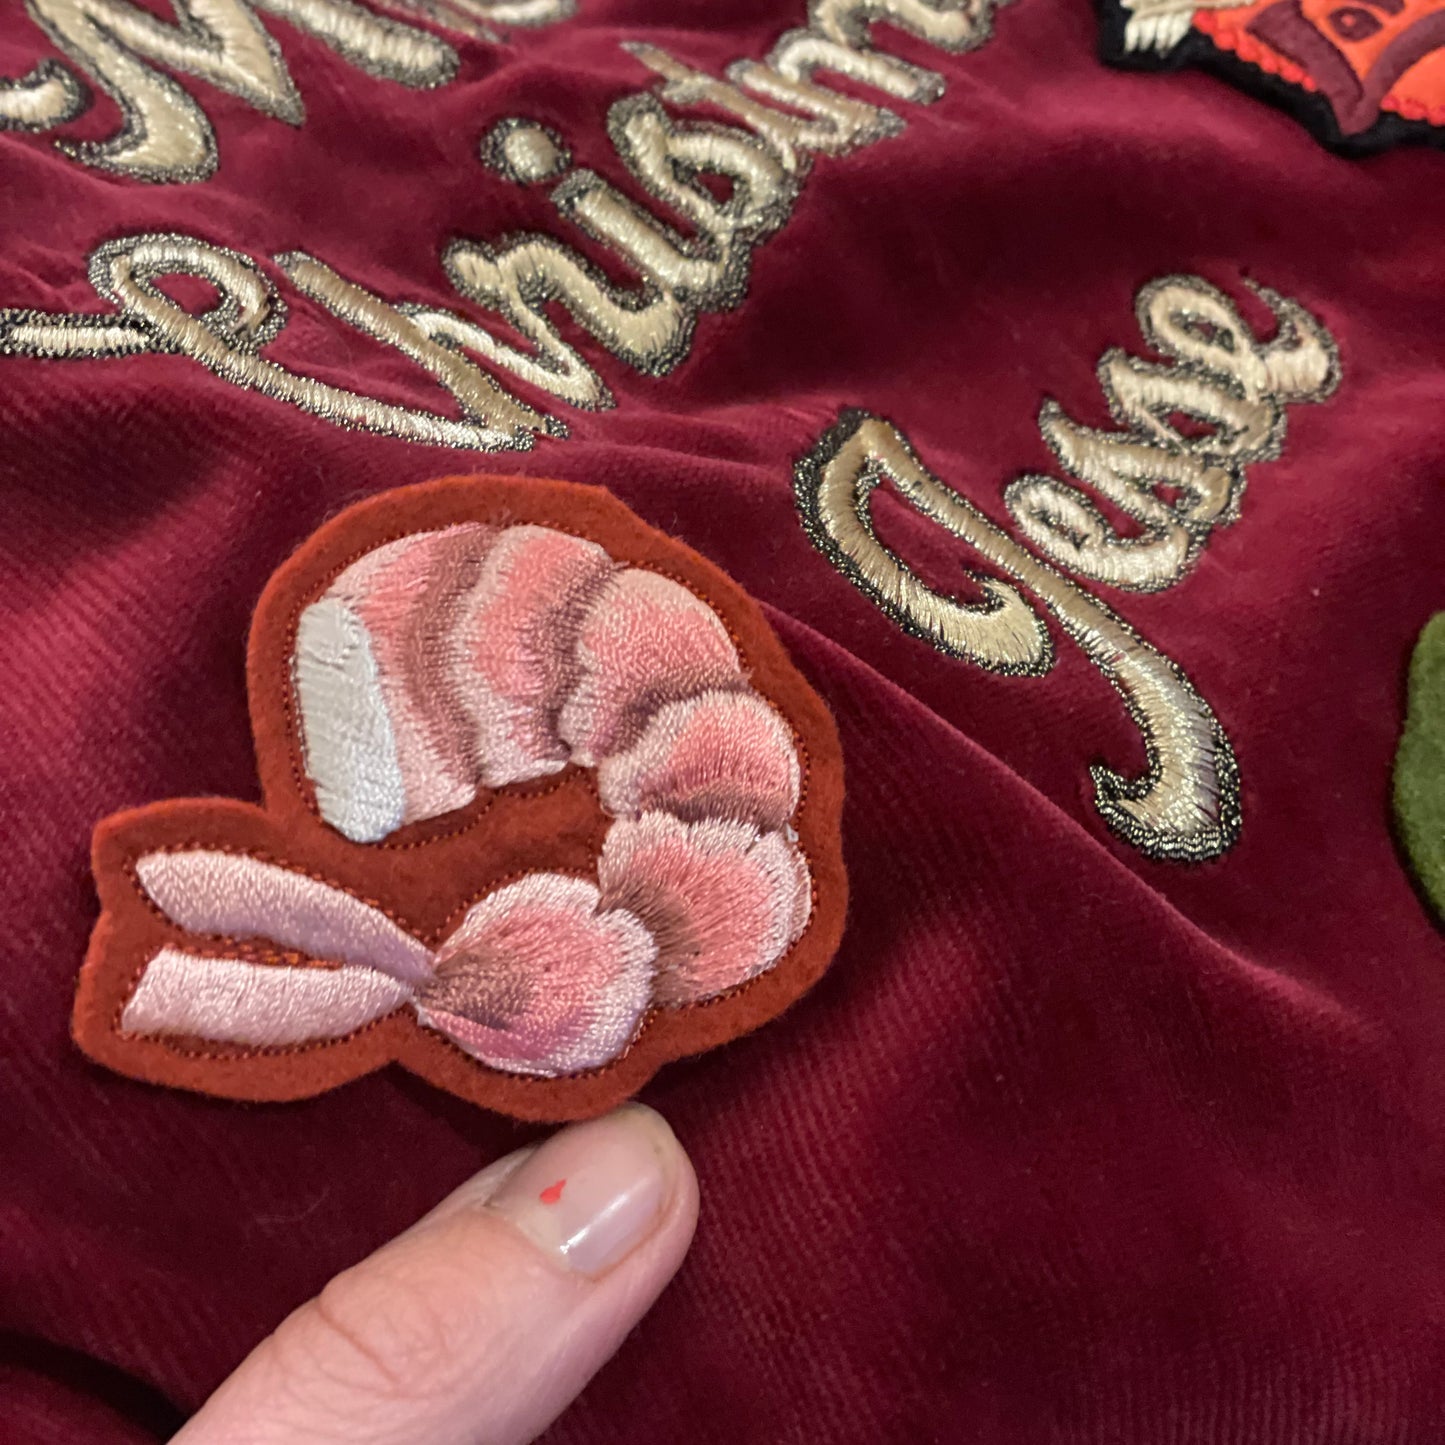 Close-up of maroon velvet Christmas sack with the prawn embroidered patch stitched on